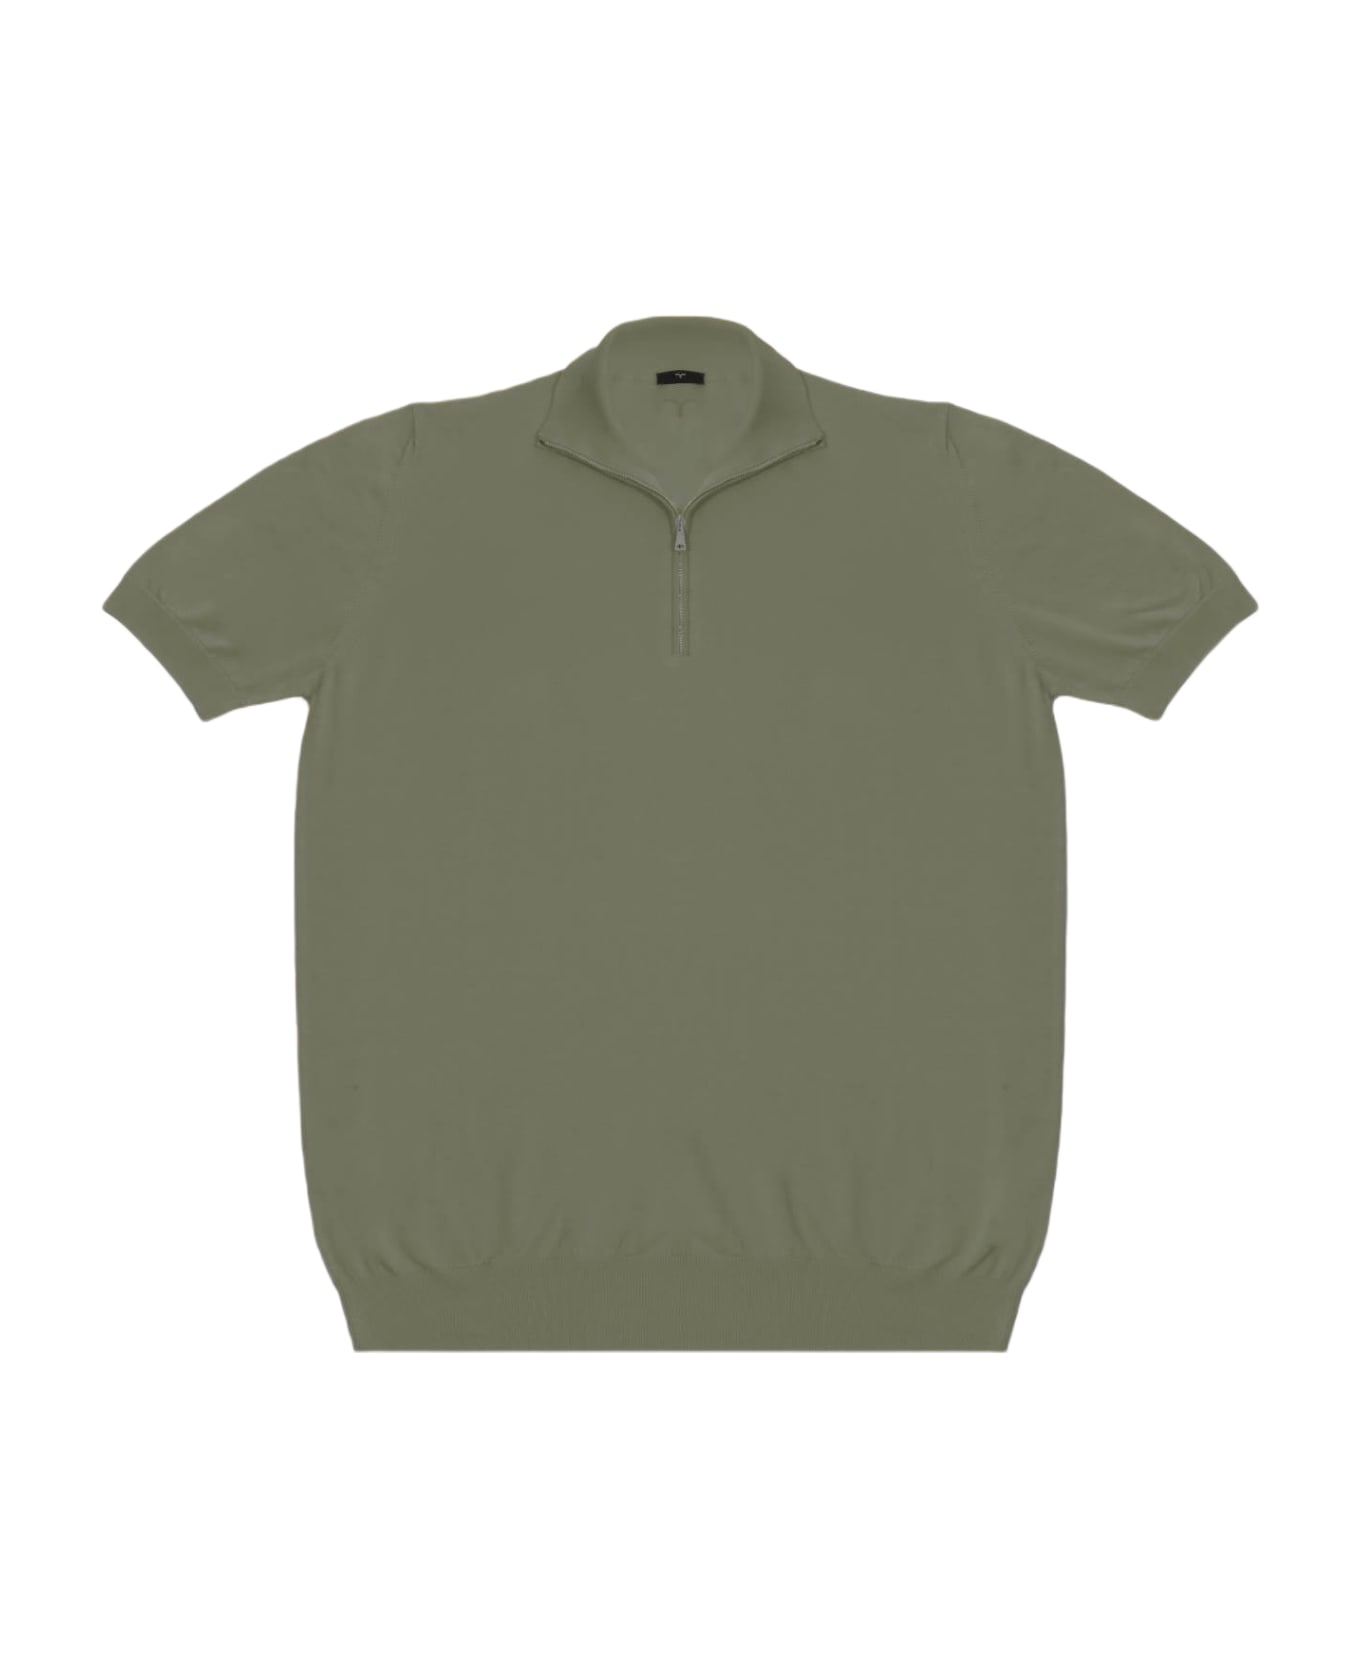 Larusmiani Paul T-shirt With Zip Sweater - Olive